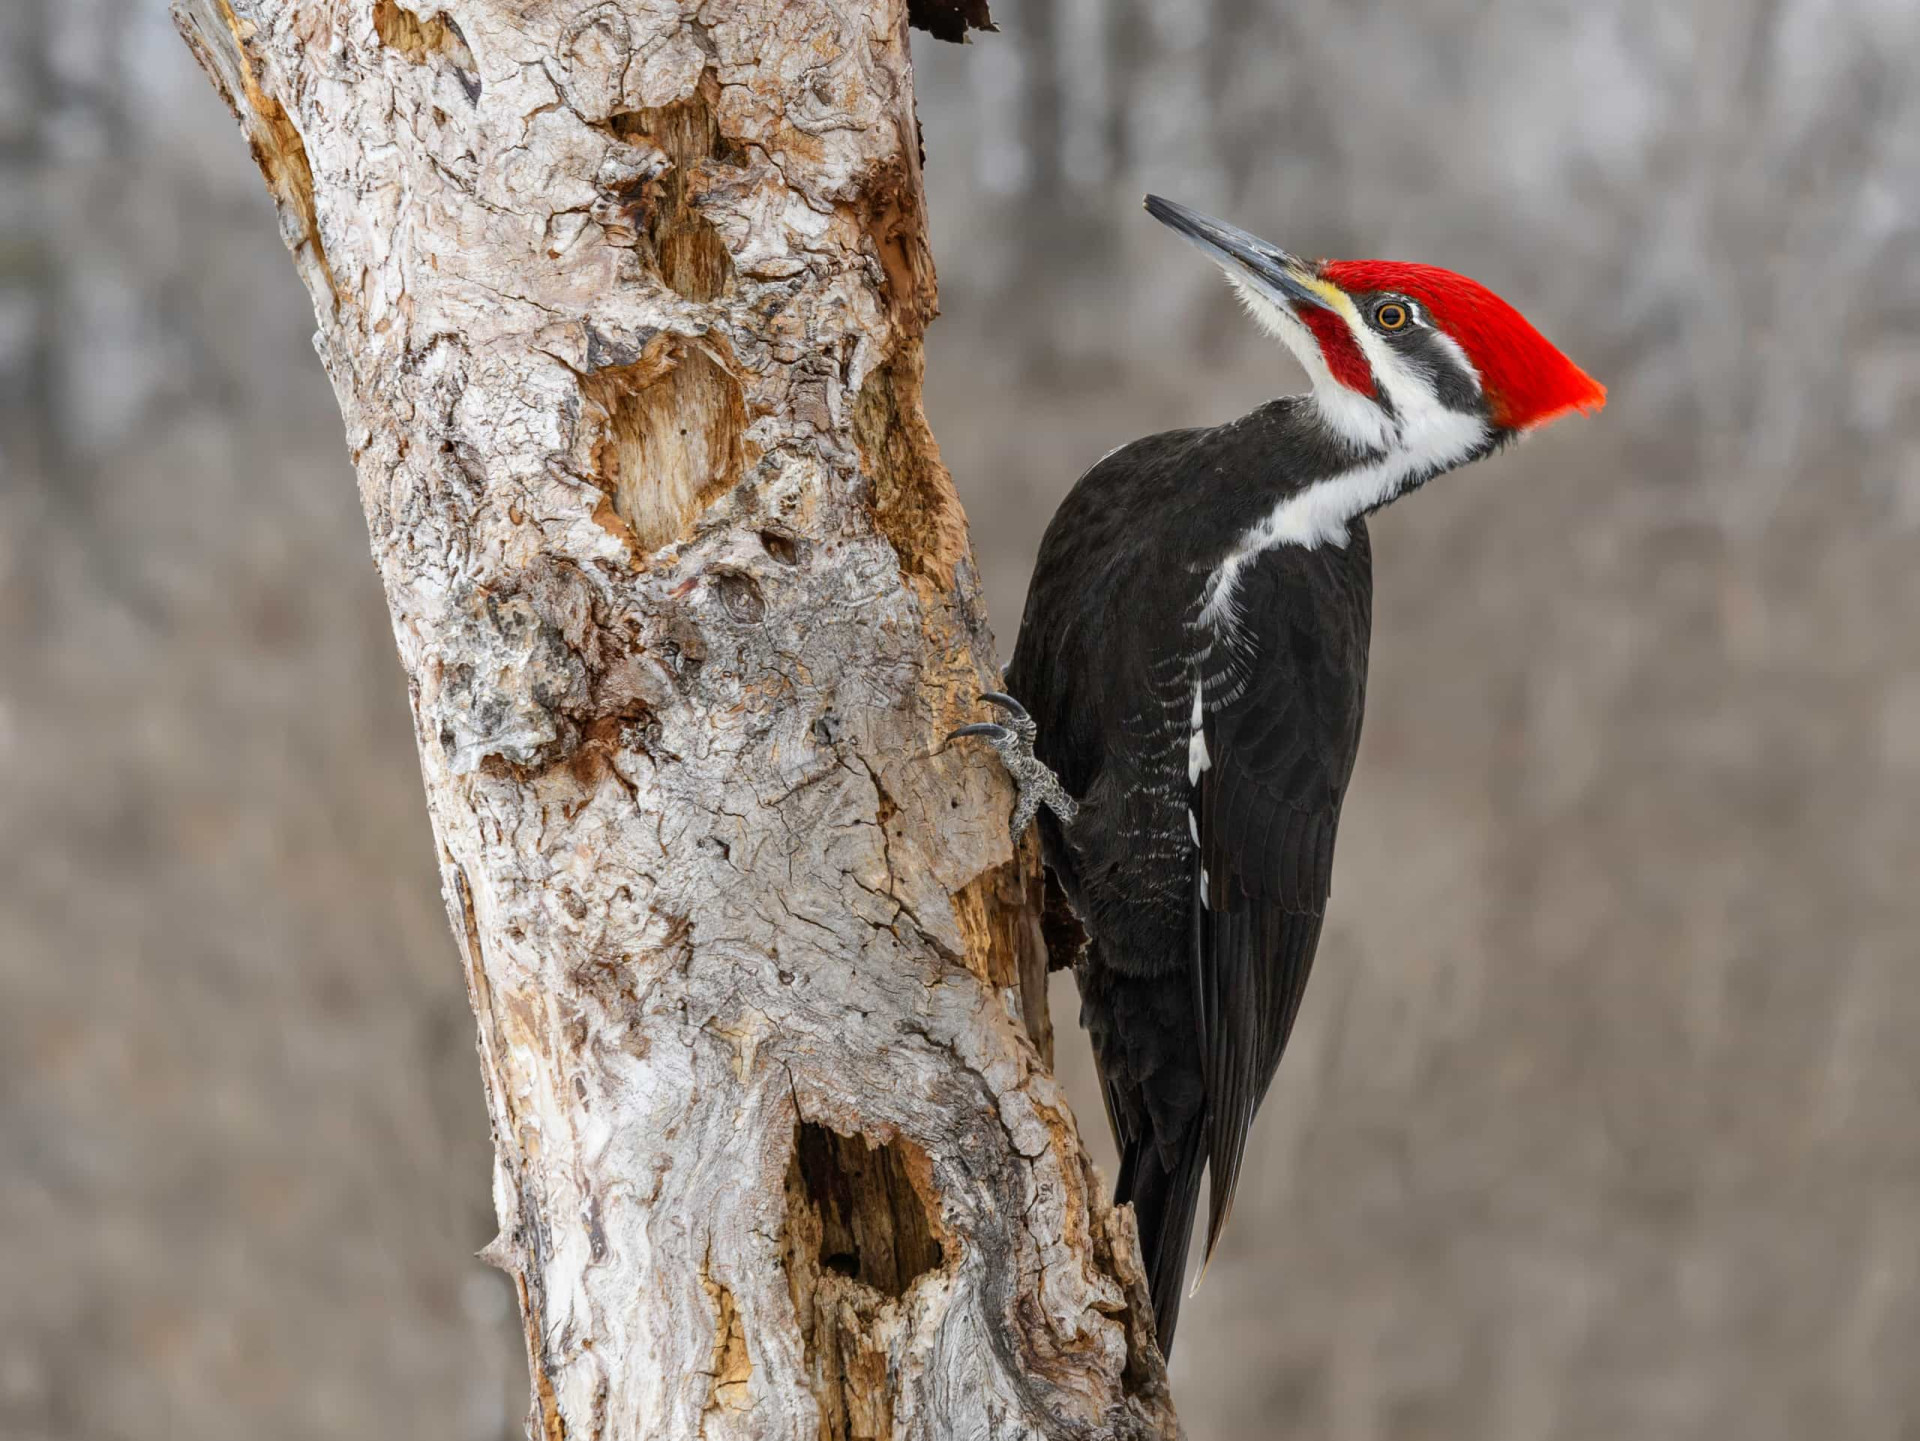 Do woodpeckers get headaches from  hammering their beaks into trees? No, apparently they developed mechanisms to prevent any type of damage to their heads.<p><a href="https://www.msn.com/en-au/community/channel/vid-7xx8mnucu55yw63we9va2gwr7uihbxwc68fxqp25x6tg4ftibpra?cvid=94631541bc0f4f89bfd59158d696ad7e">Follow us and access great exclusive content every day</a></p>